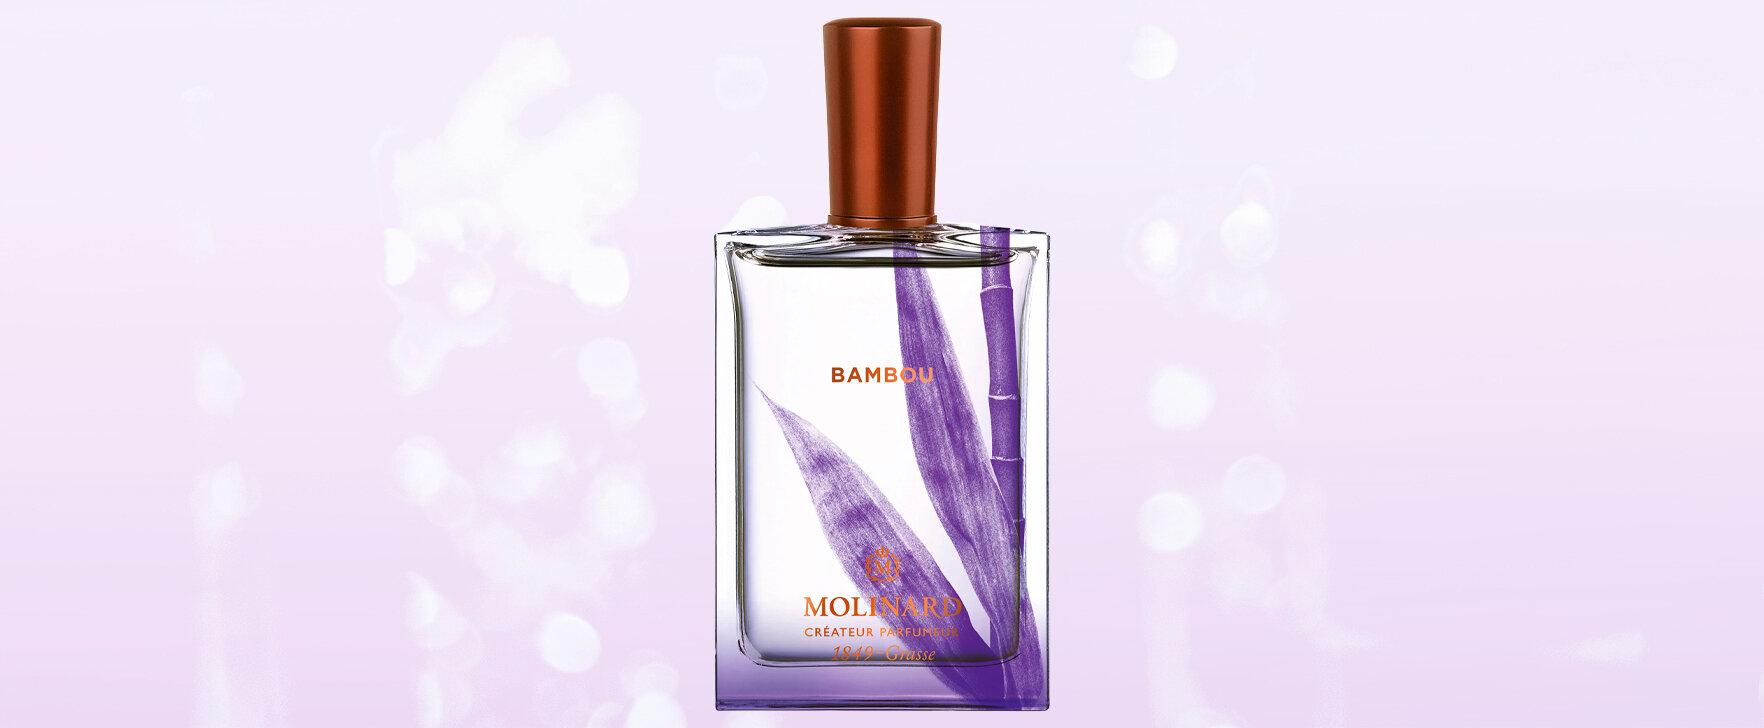 Inspired by the Bamboo Forests: The New Unisex Fragrance Bambou by Molinard